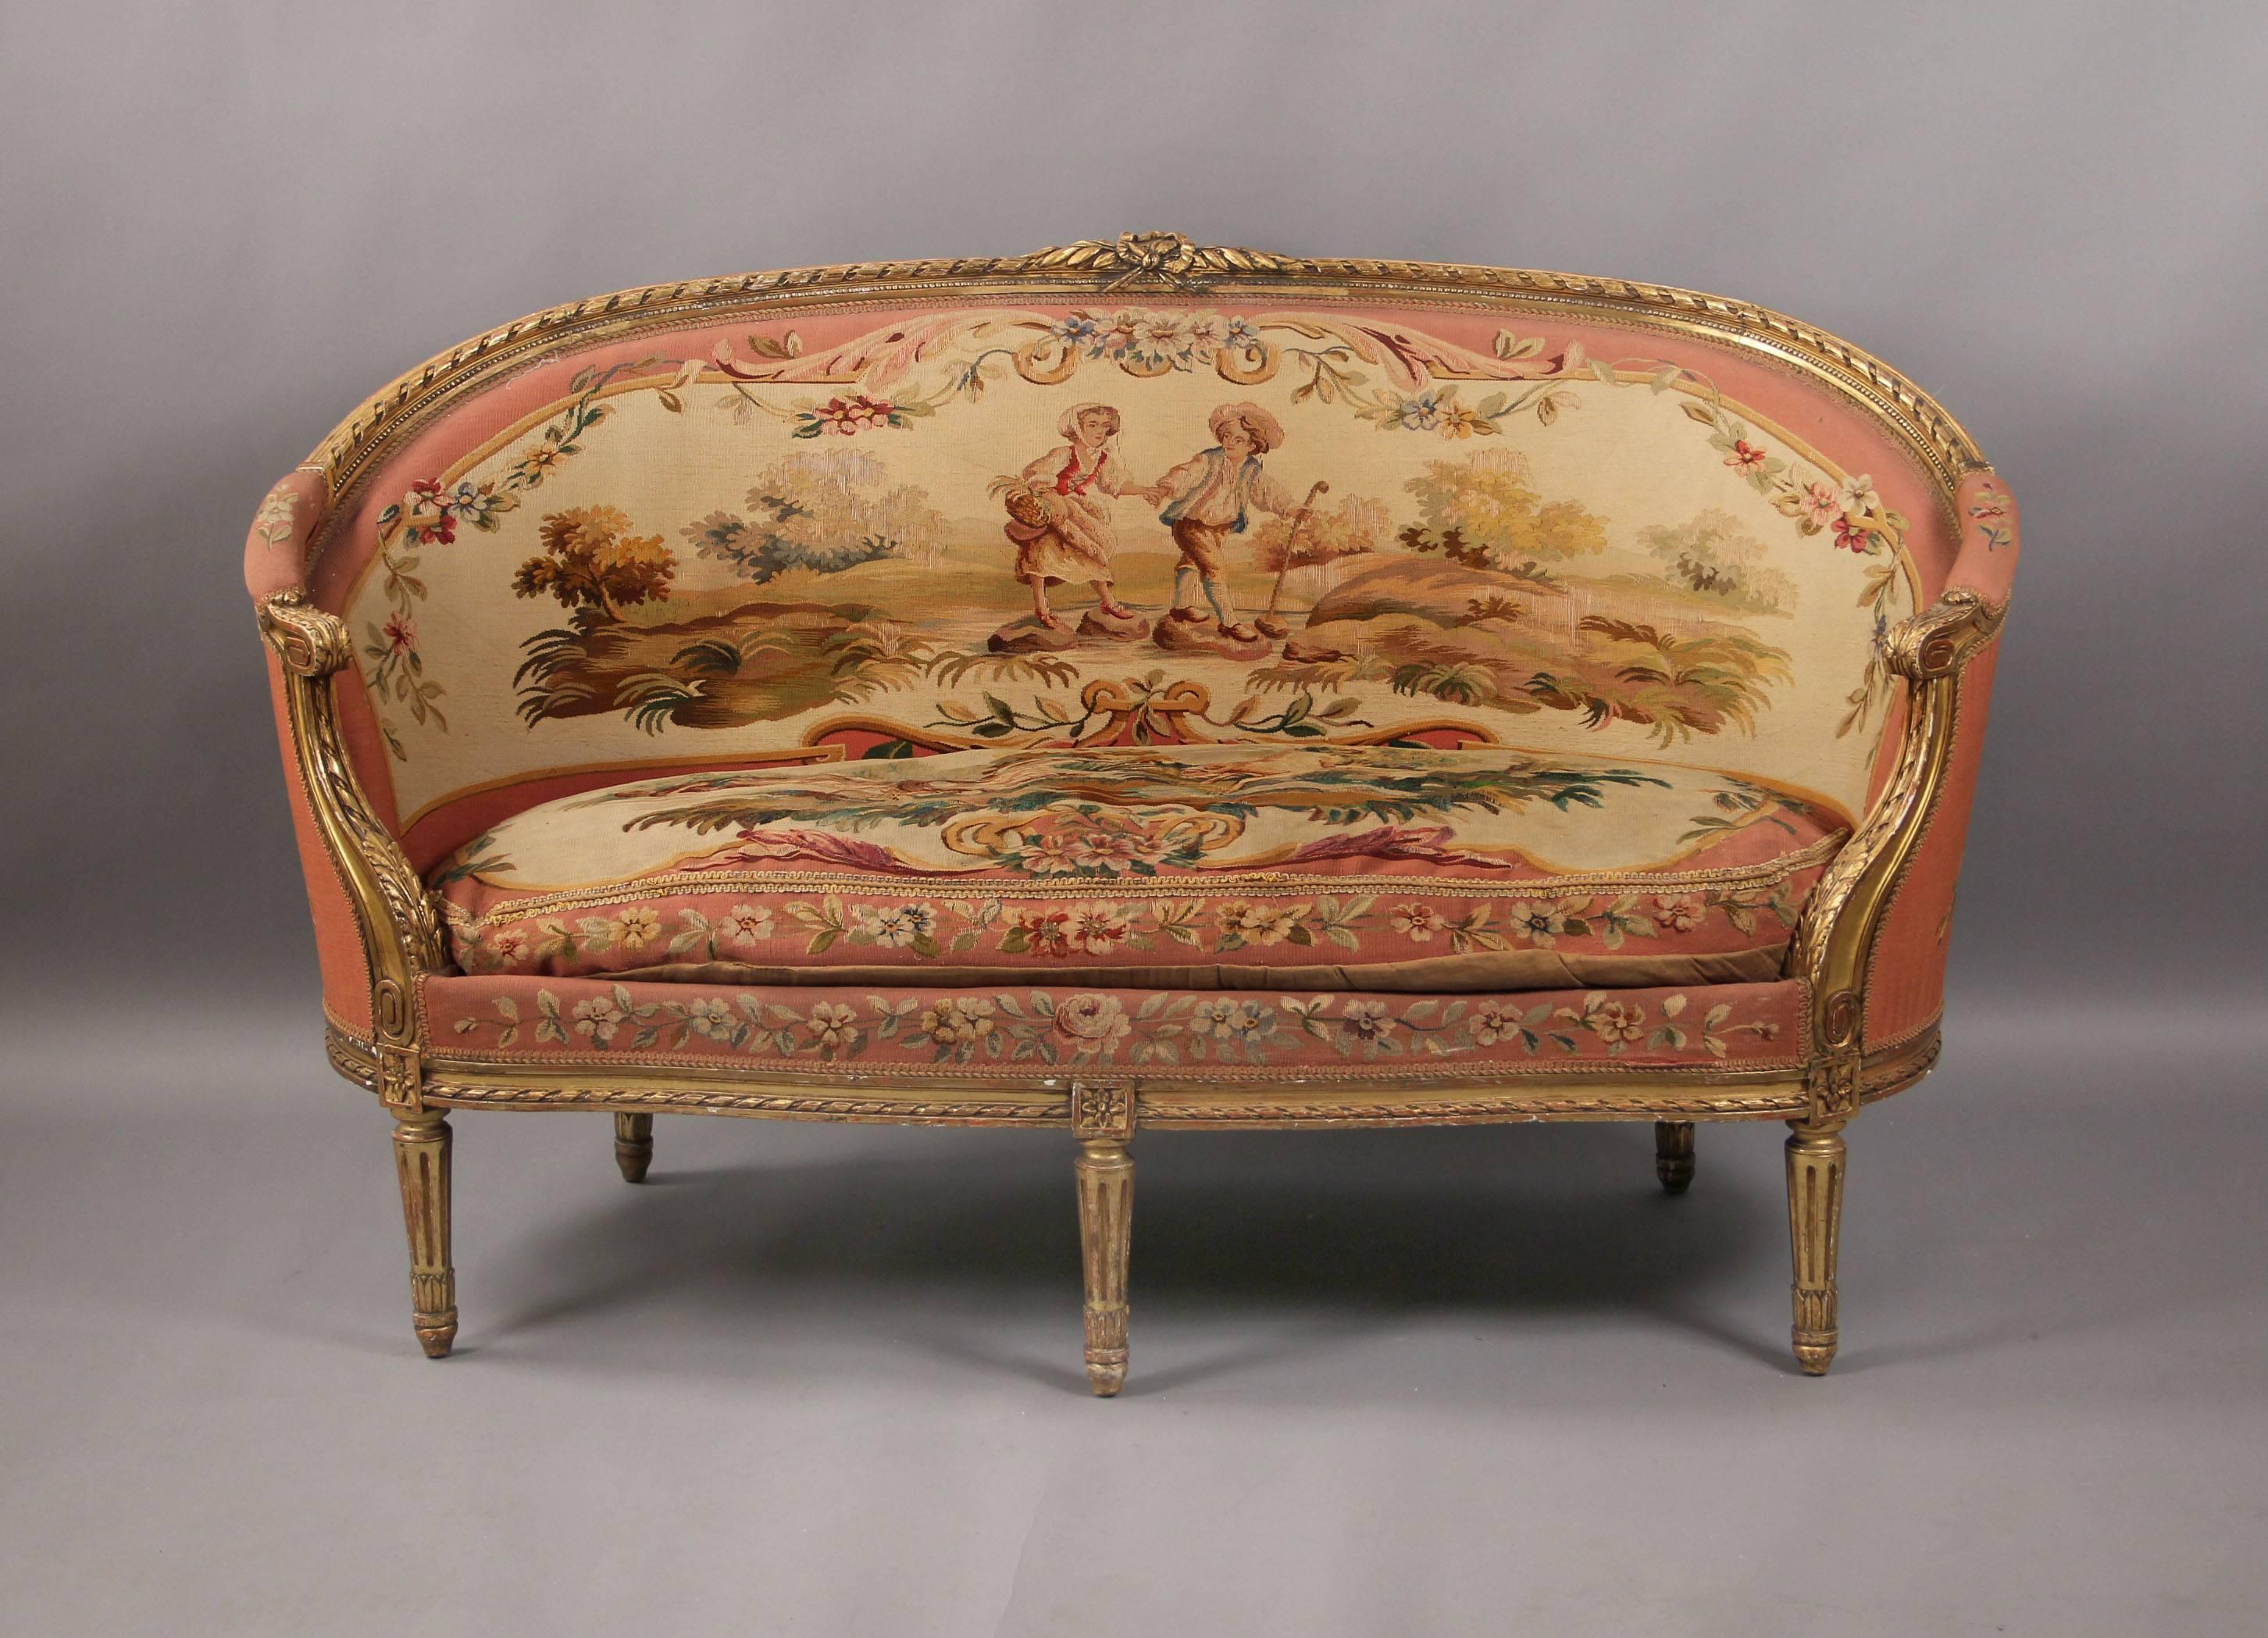 A beautiful late 19th century Louis XVI style five-piece carved giltwood Aubusson tapestry parlor set

Comprising of a settee and four armchairs.

Each with an oval upholstered back continuing to padded arms and an upholstered seat, raised on